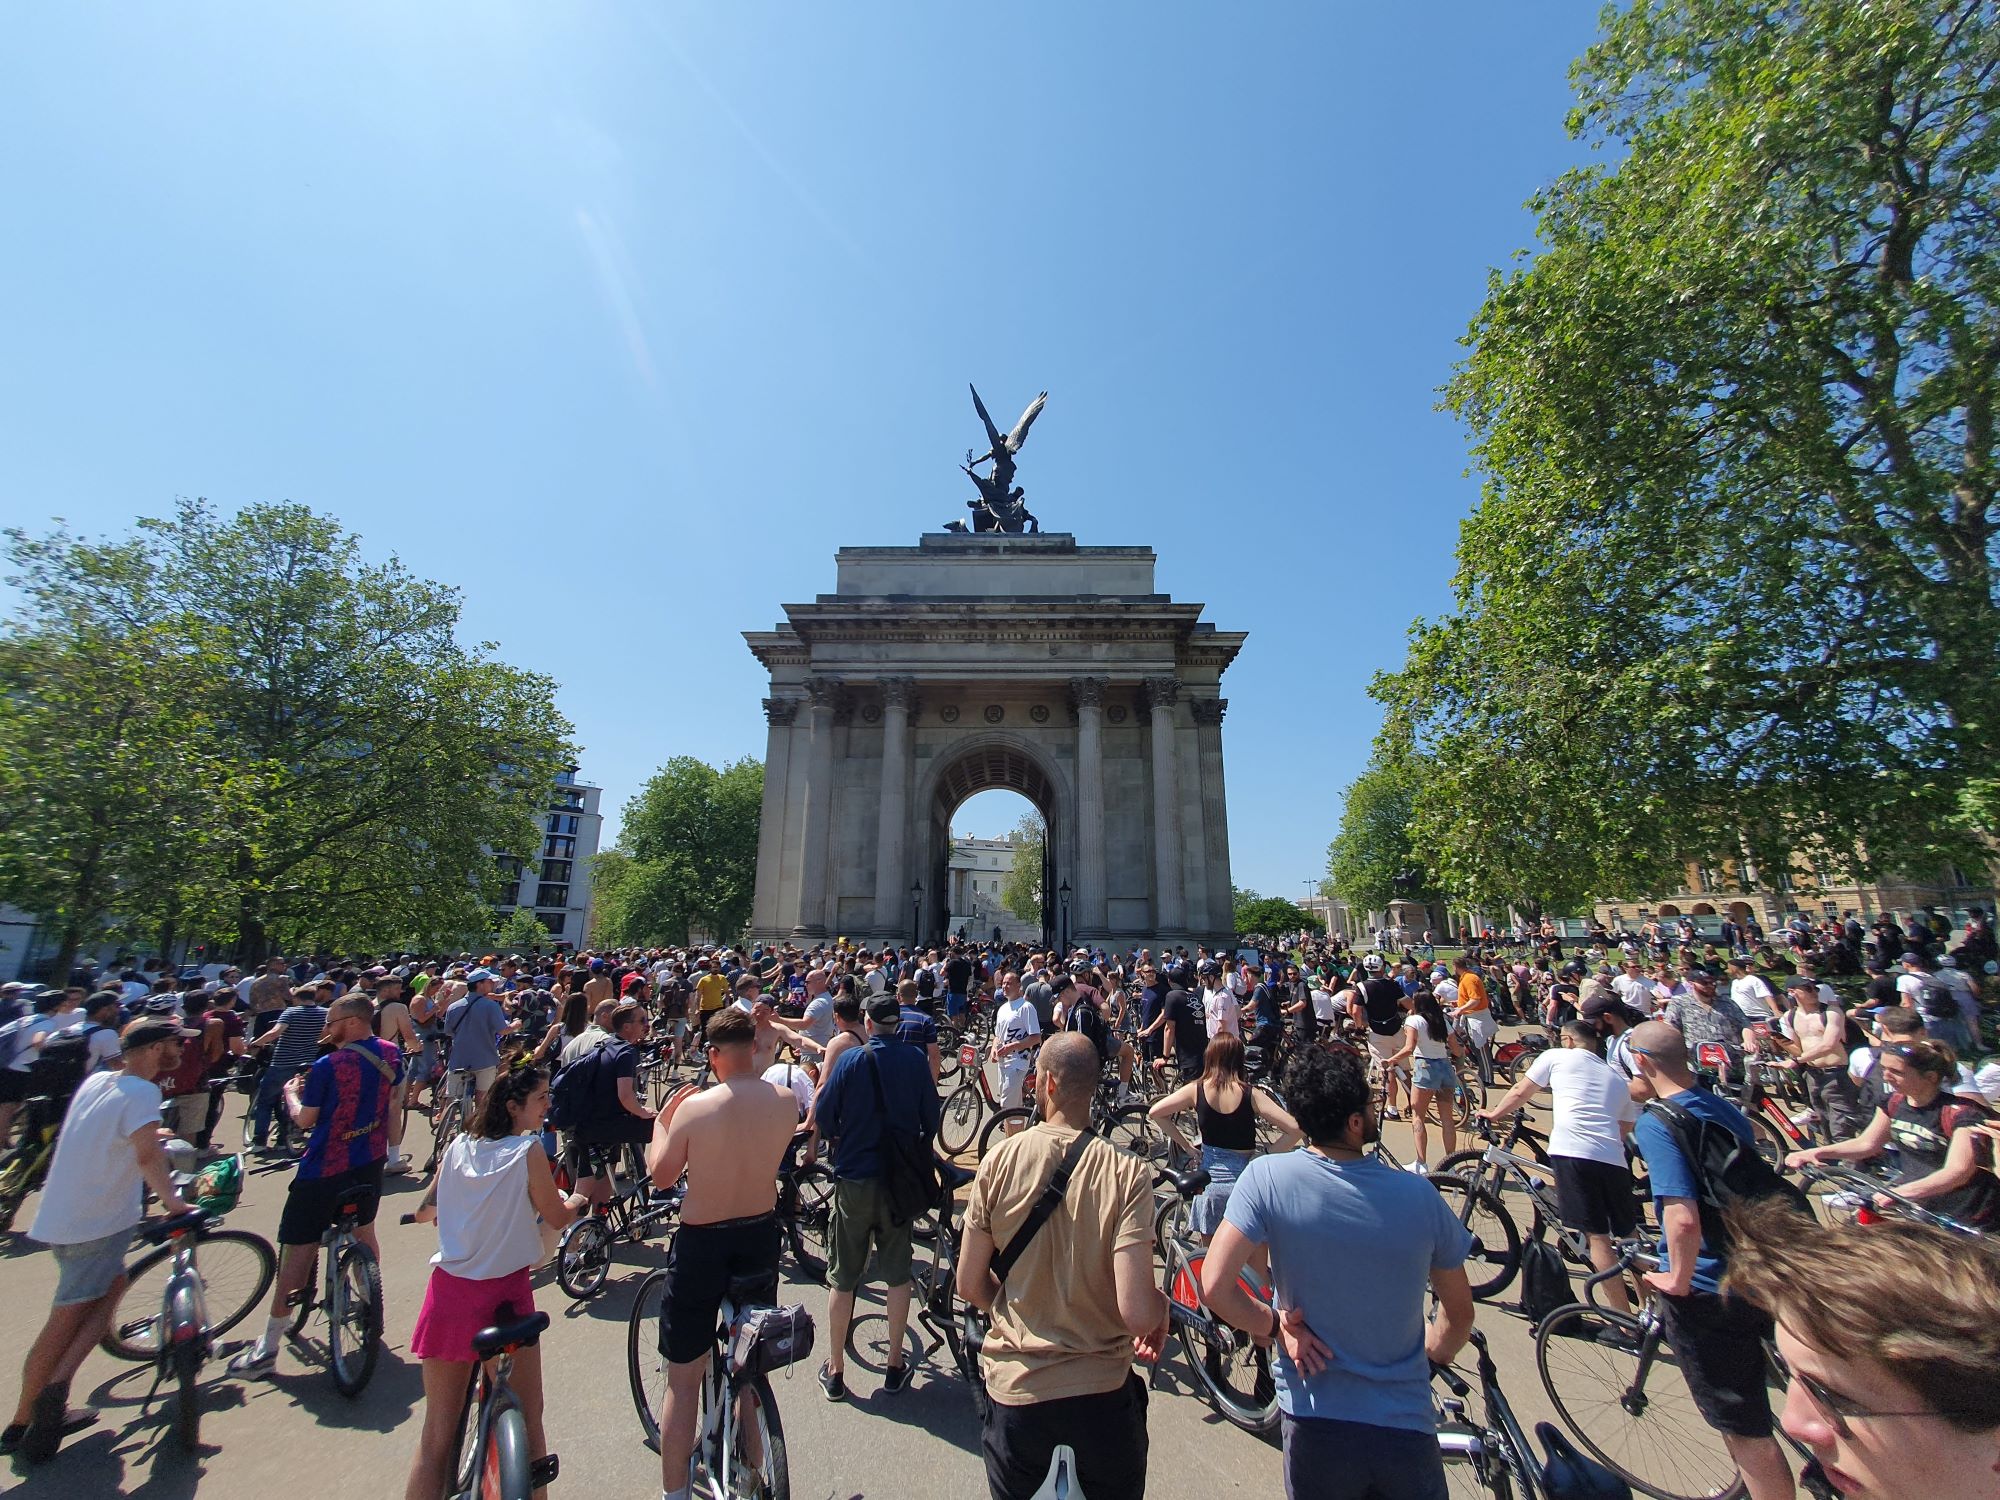 A mass cycle ride in London with lots of people and their cycles